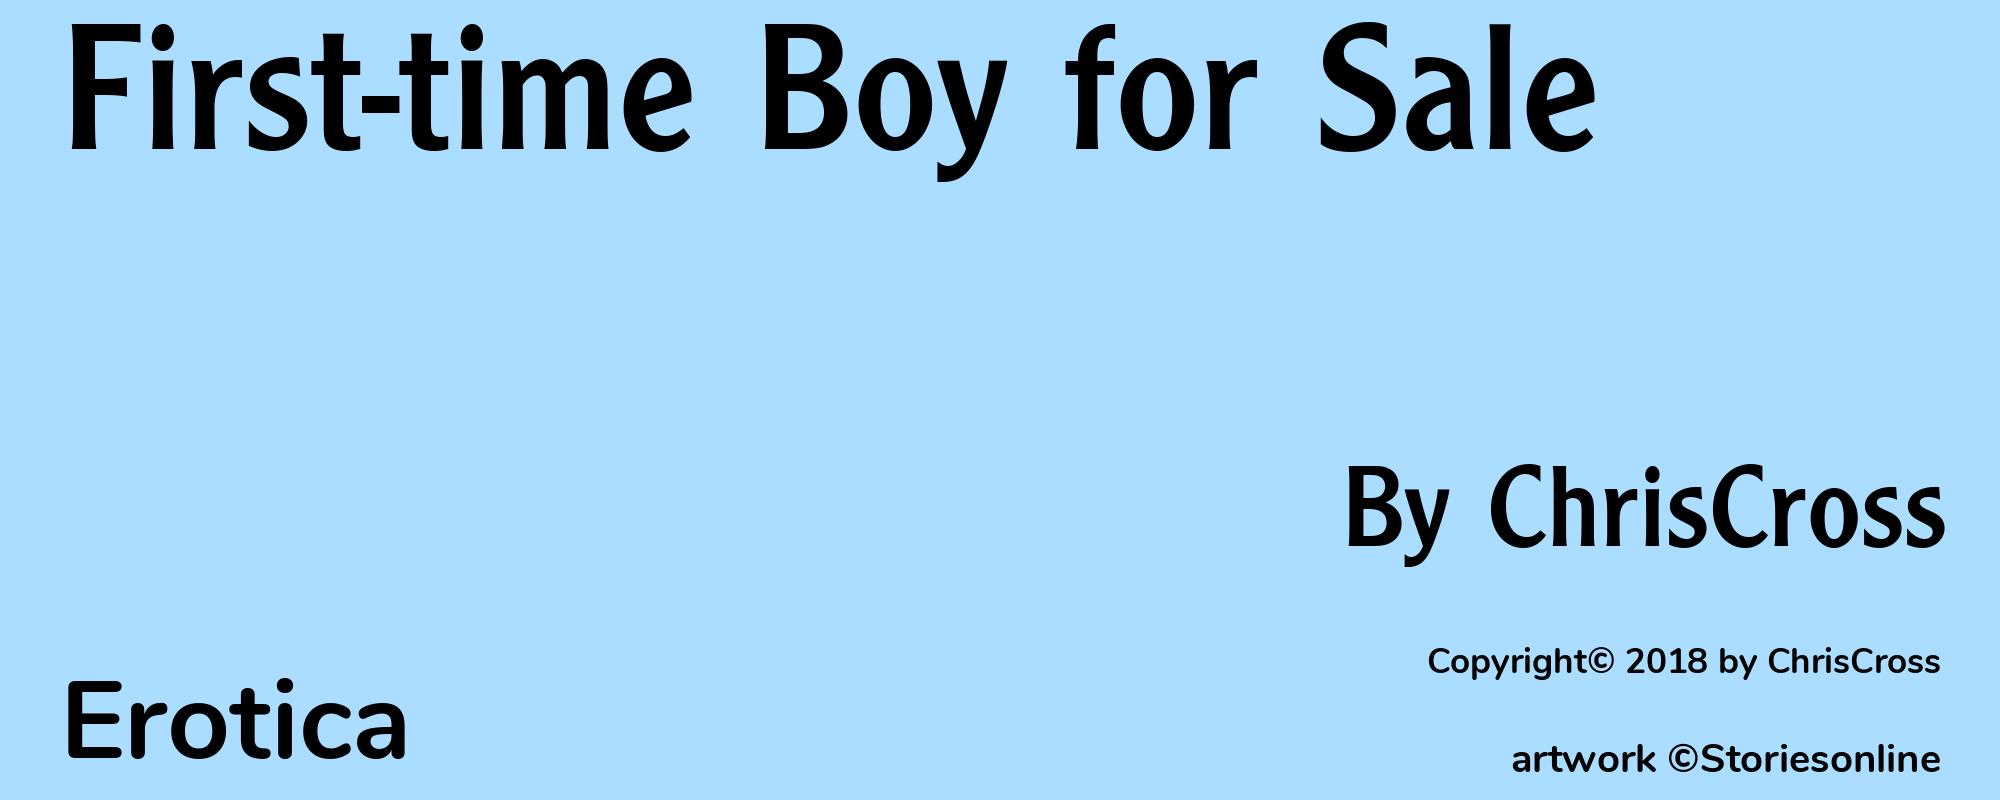 First-time Boy for Sale - Cover